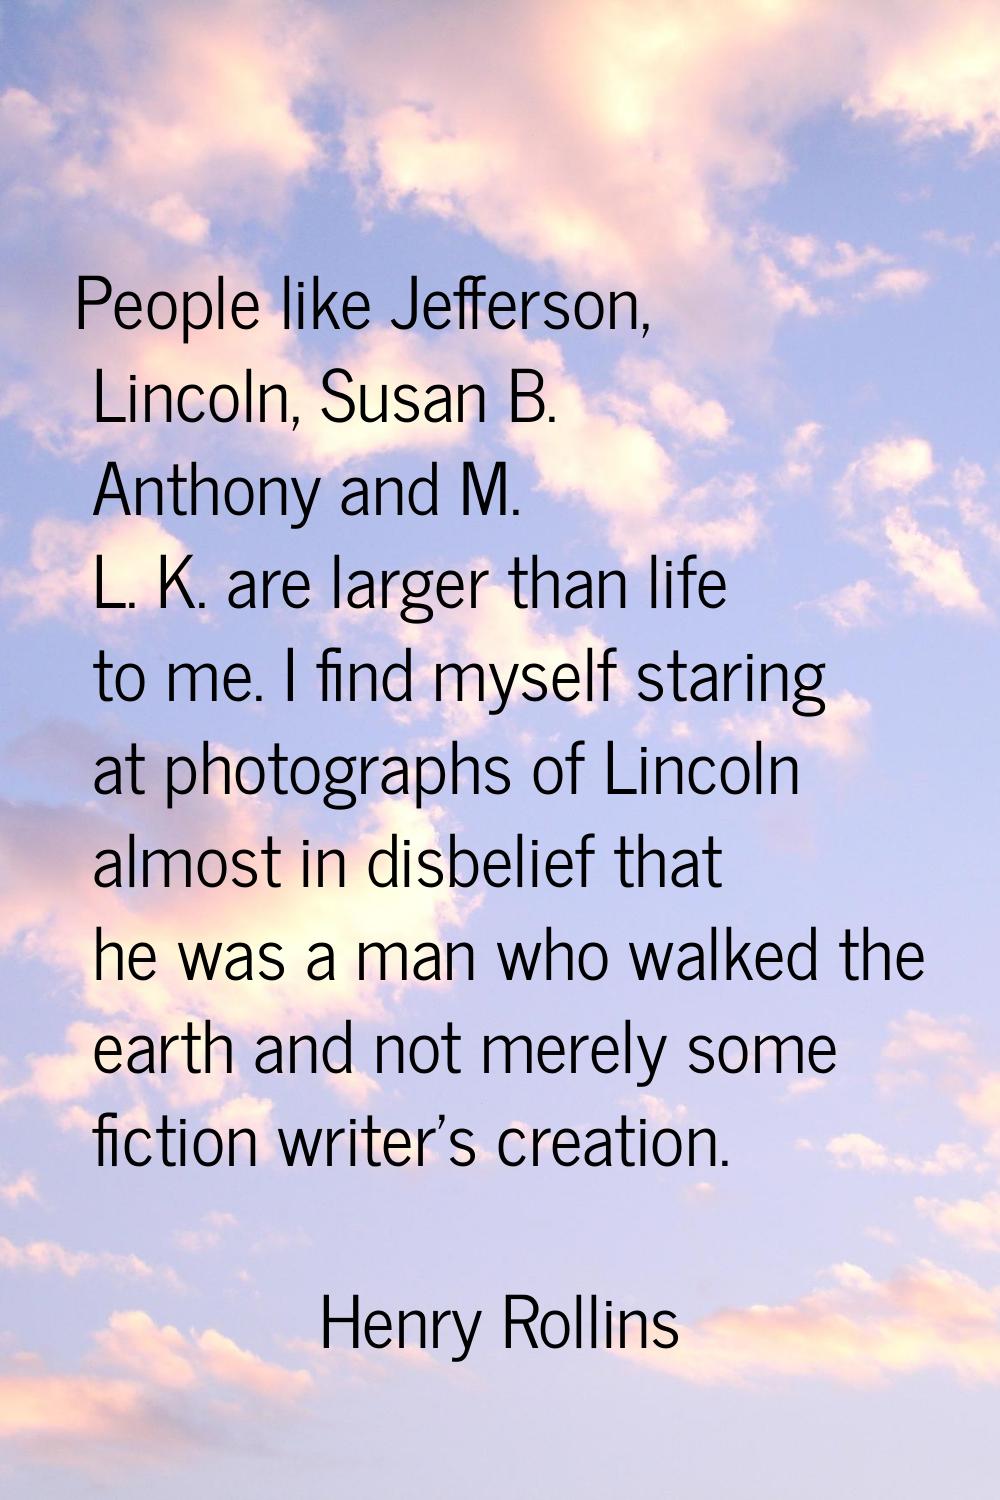 People like Jefferson, Lincoln, Susan B. Anthony and M. L. K. are larger than life to me. I find my